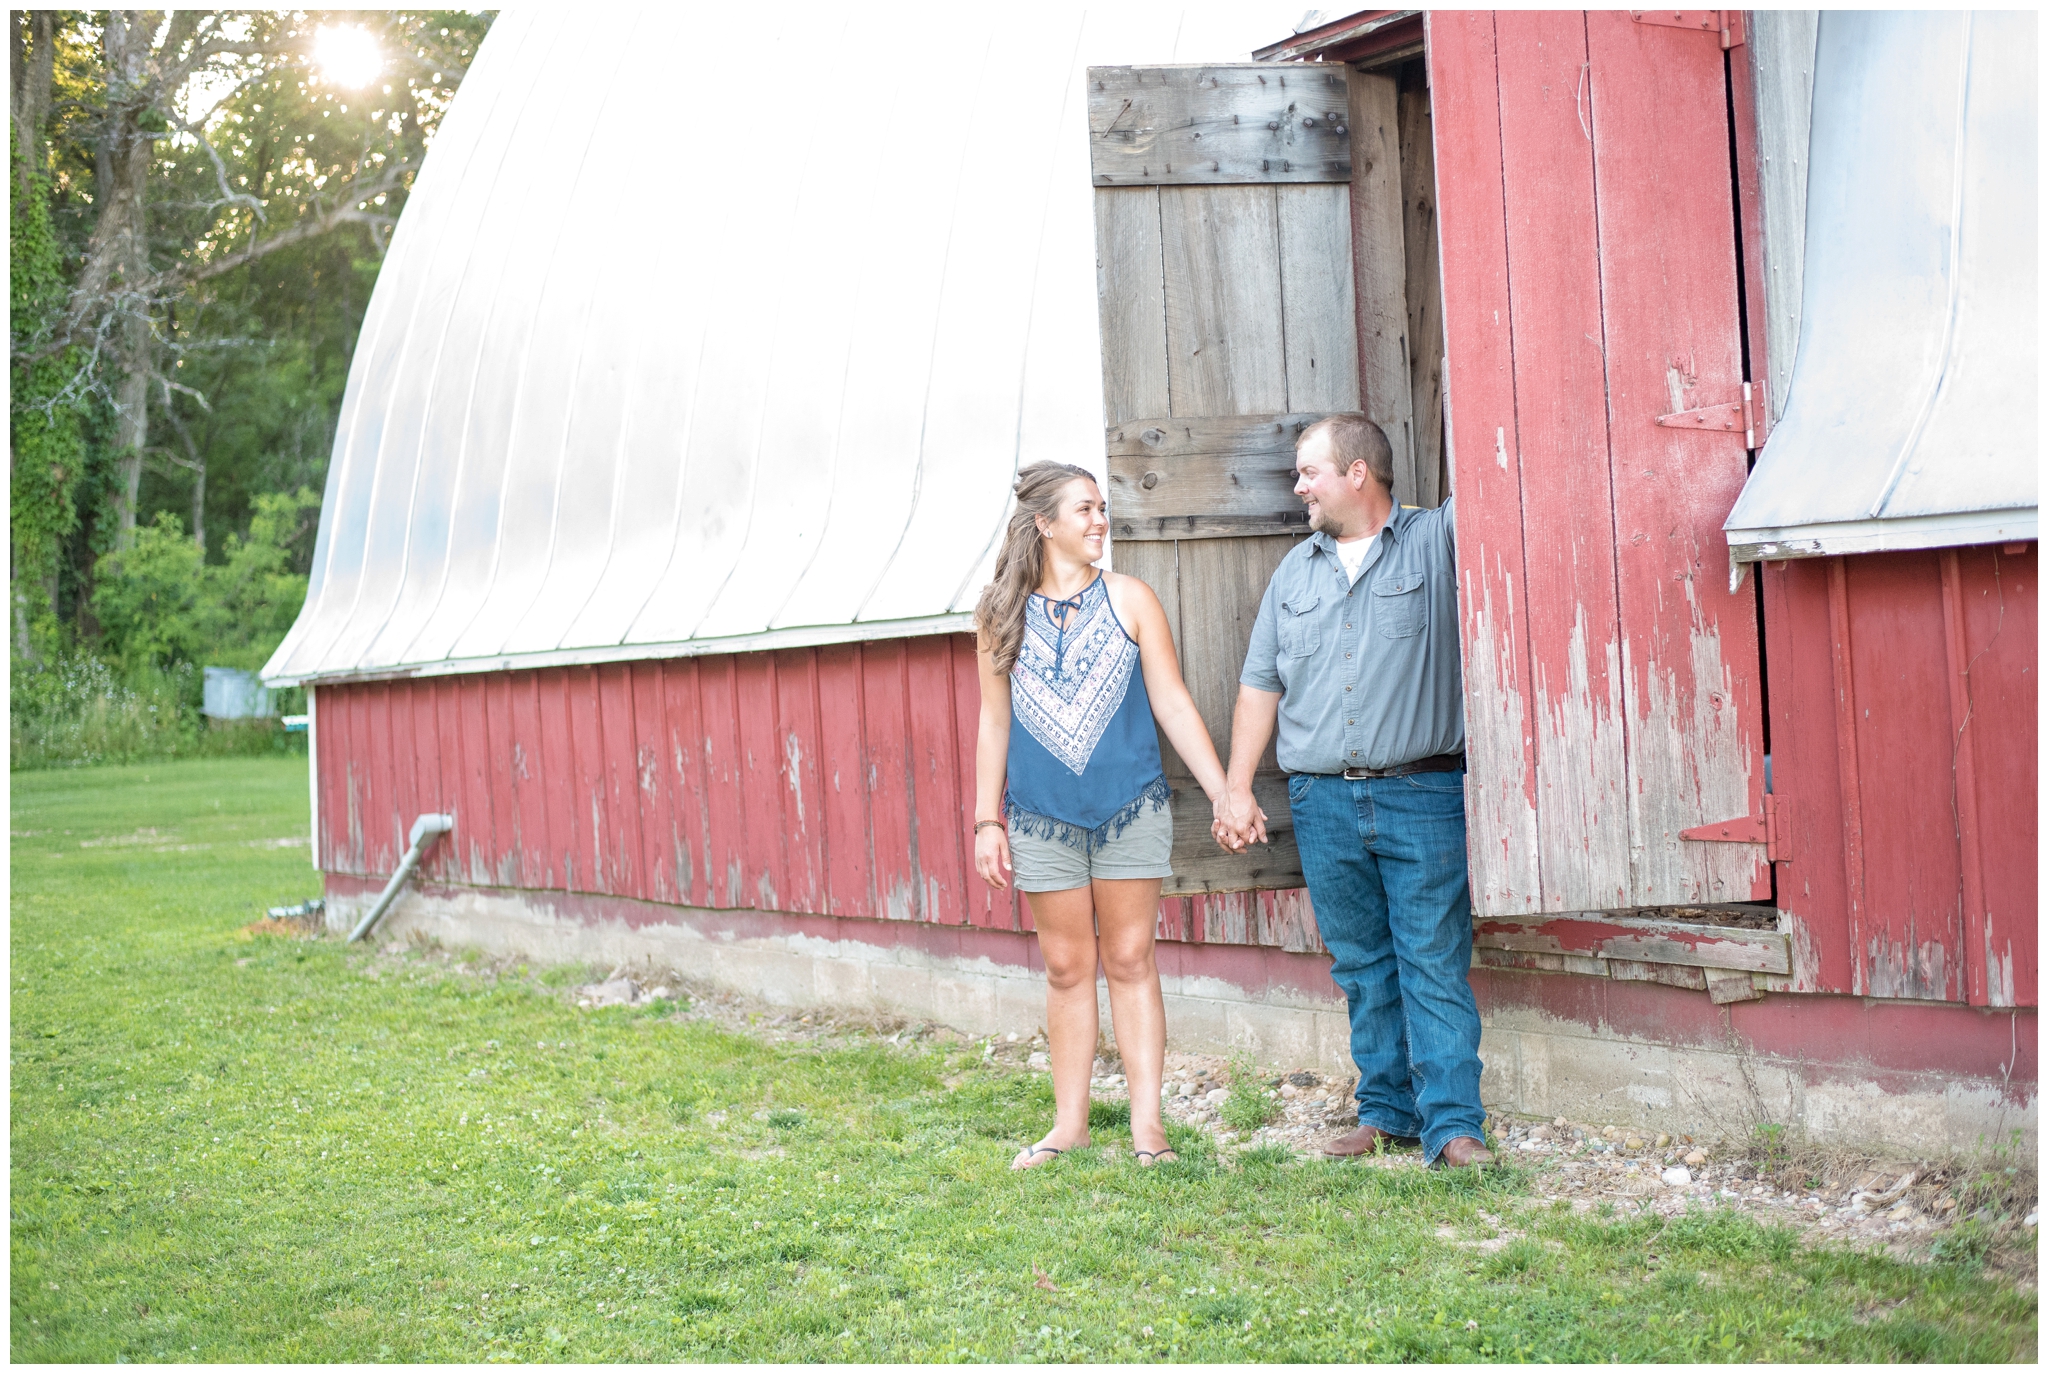 Danielle Kristine Photography, Central Wisconsin Photographer